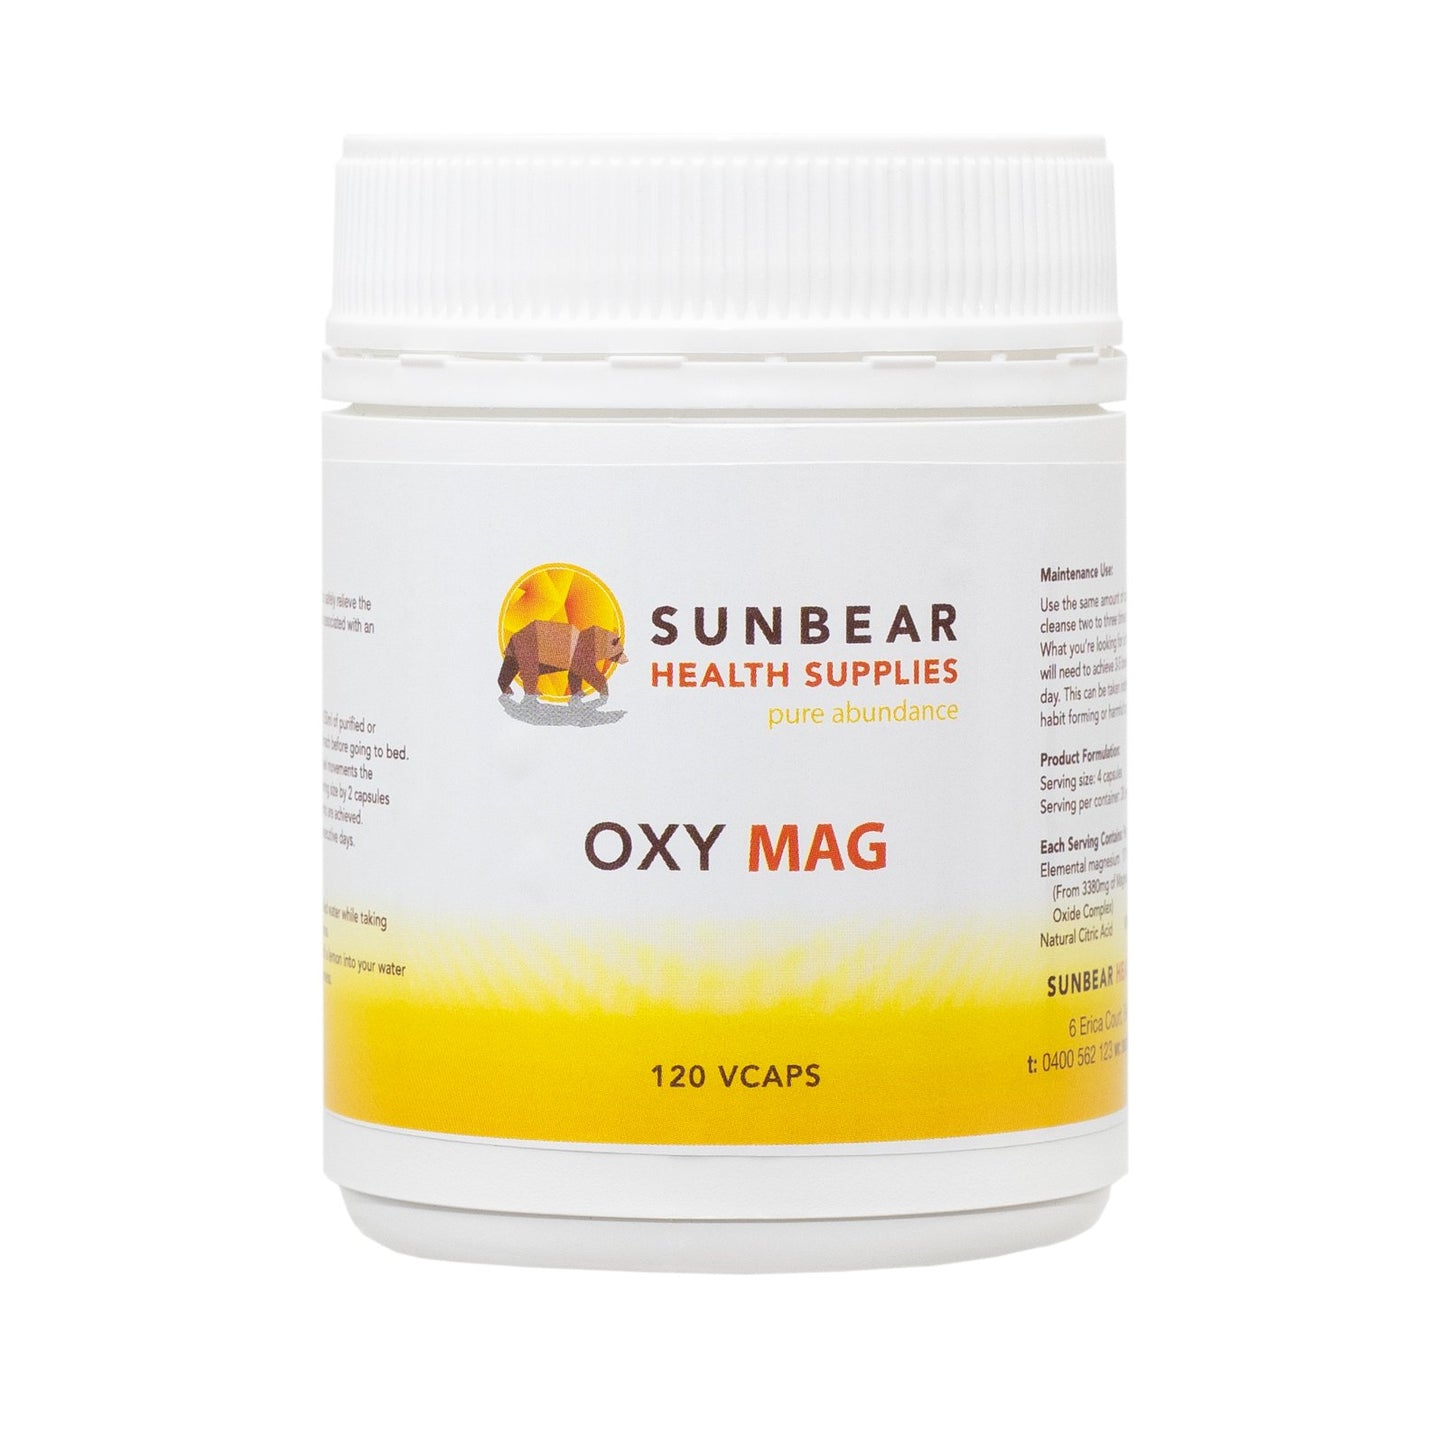 OxyCleanse Powder x 3 - Oxygenated Magnesium Intestinal Cleanse - Sunbear Health Supplies - 120 Capsules